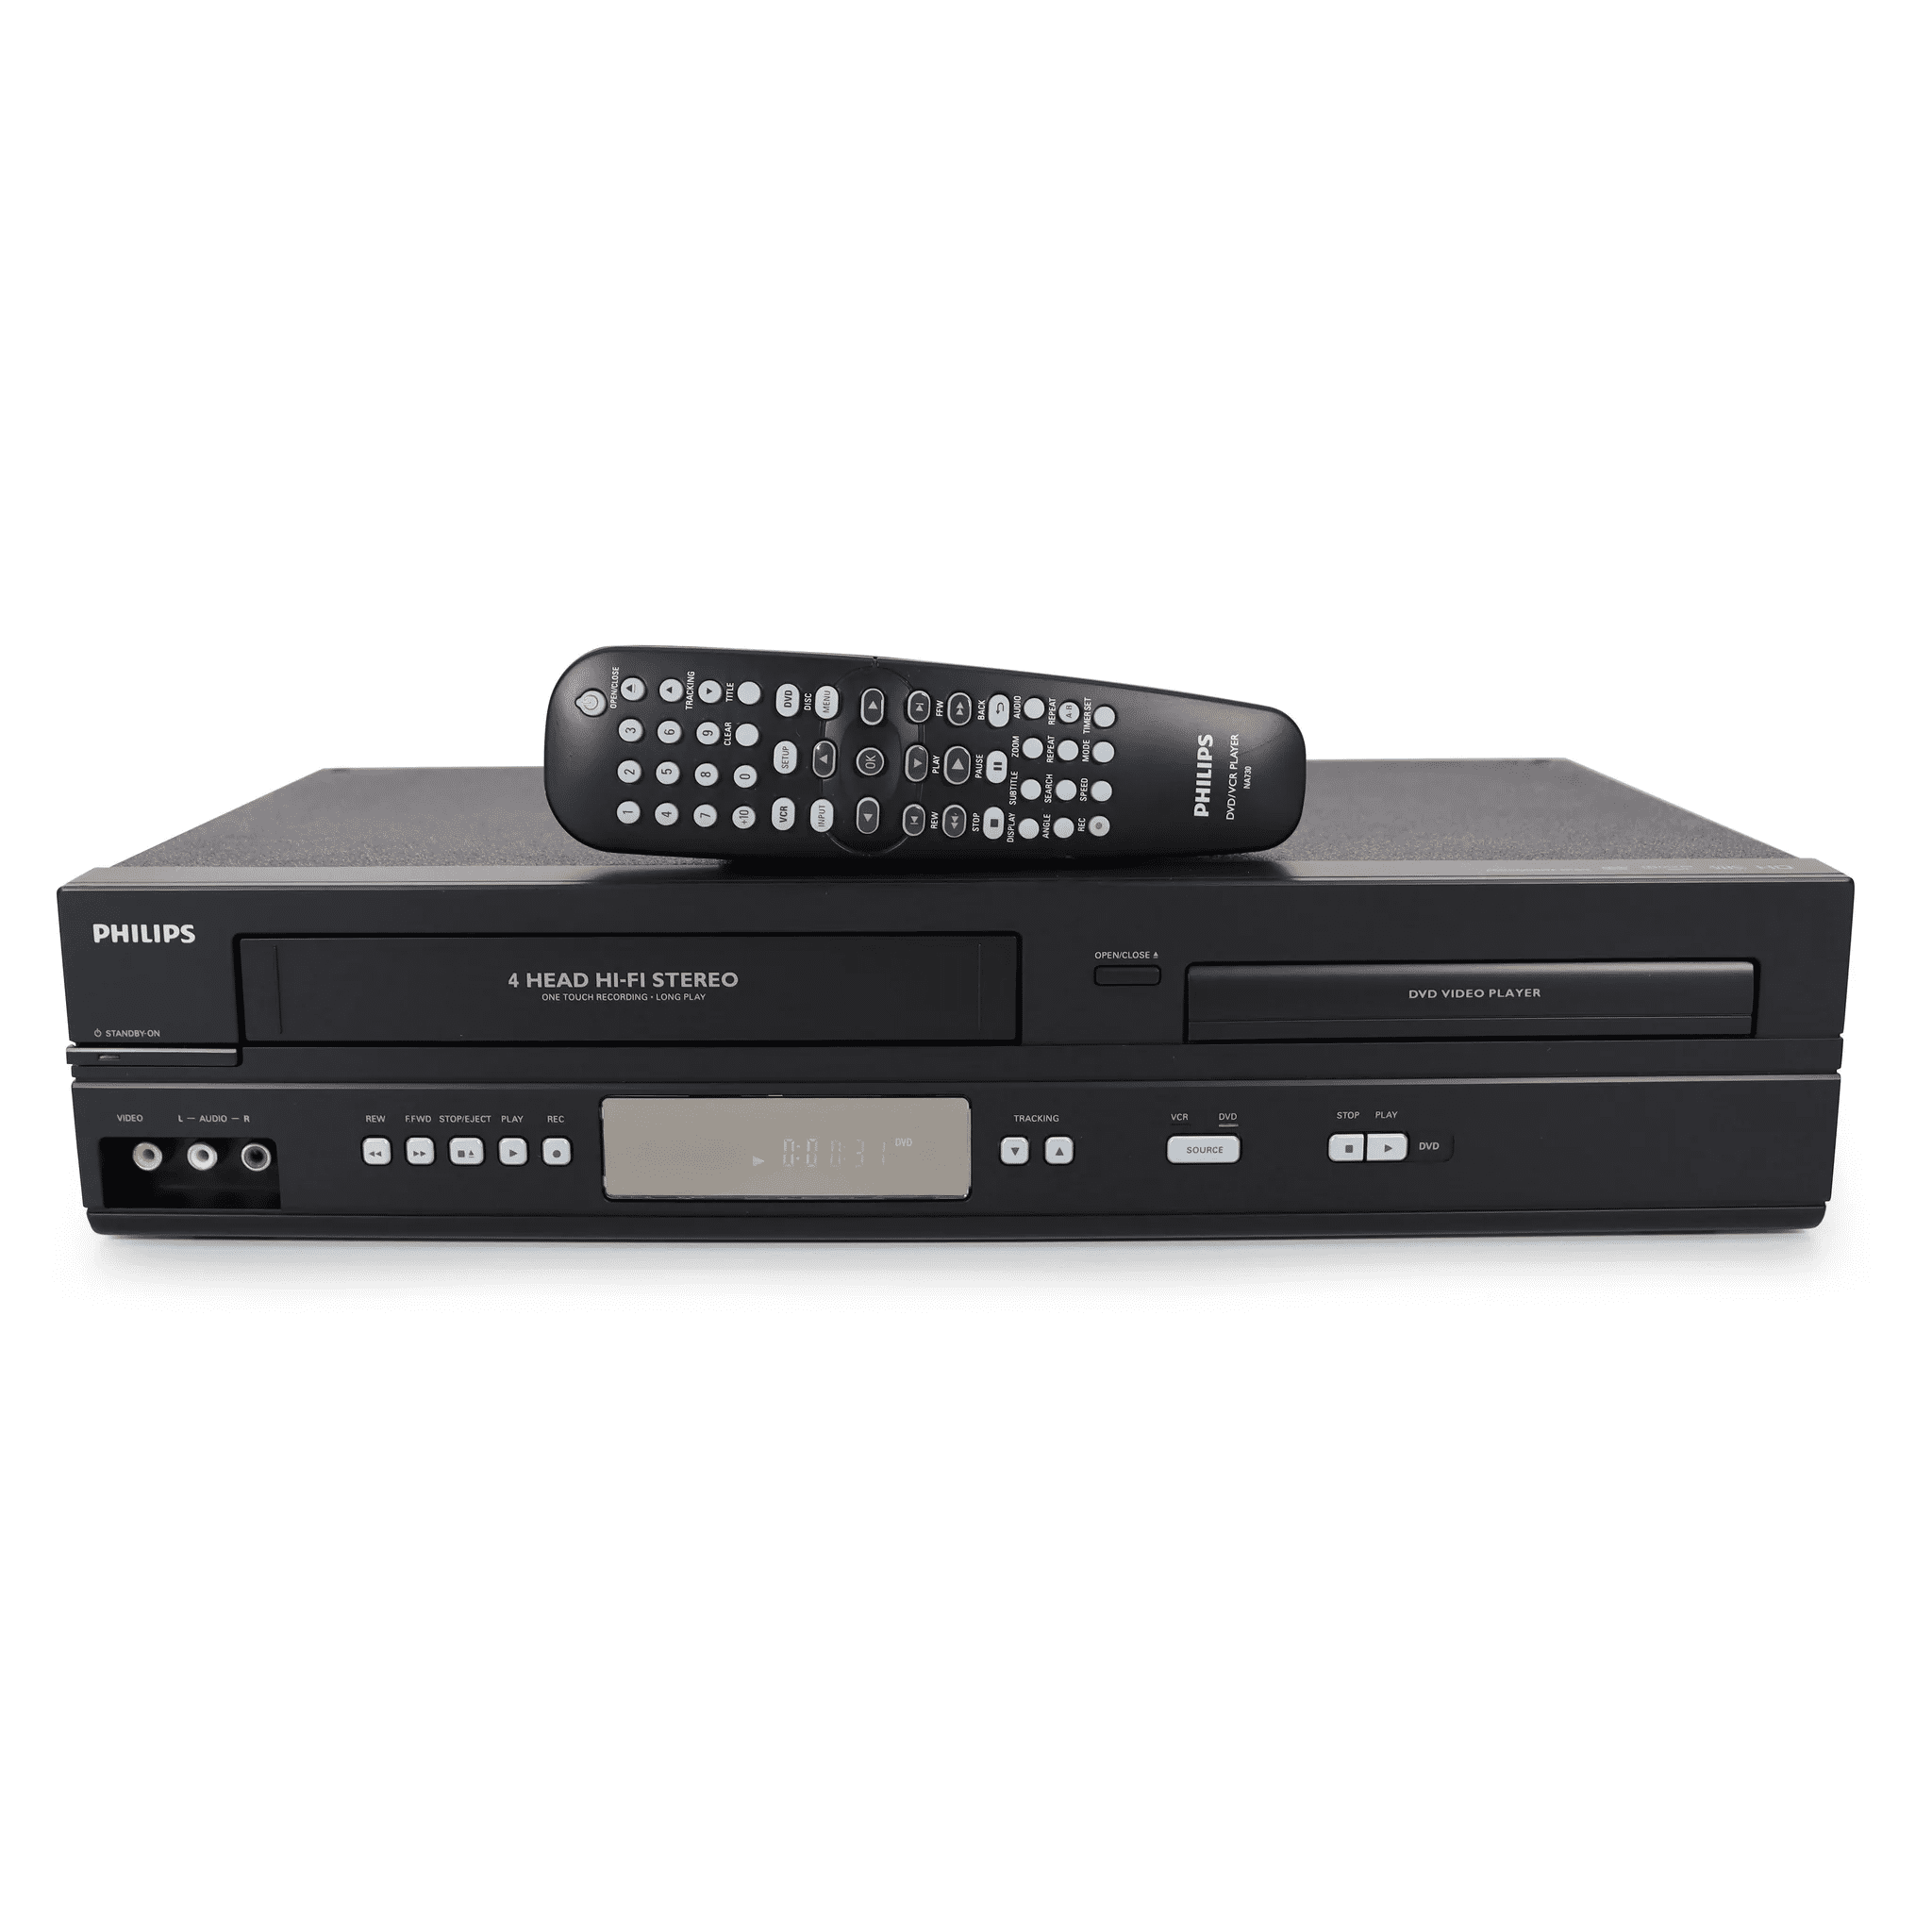 Philips DVP3345V/f7 DVD/VCR Combo with Remote, Quick Start Guide, A/V Cables and HDMI Converter - Walmart.com